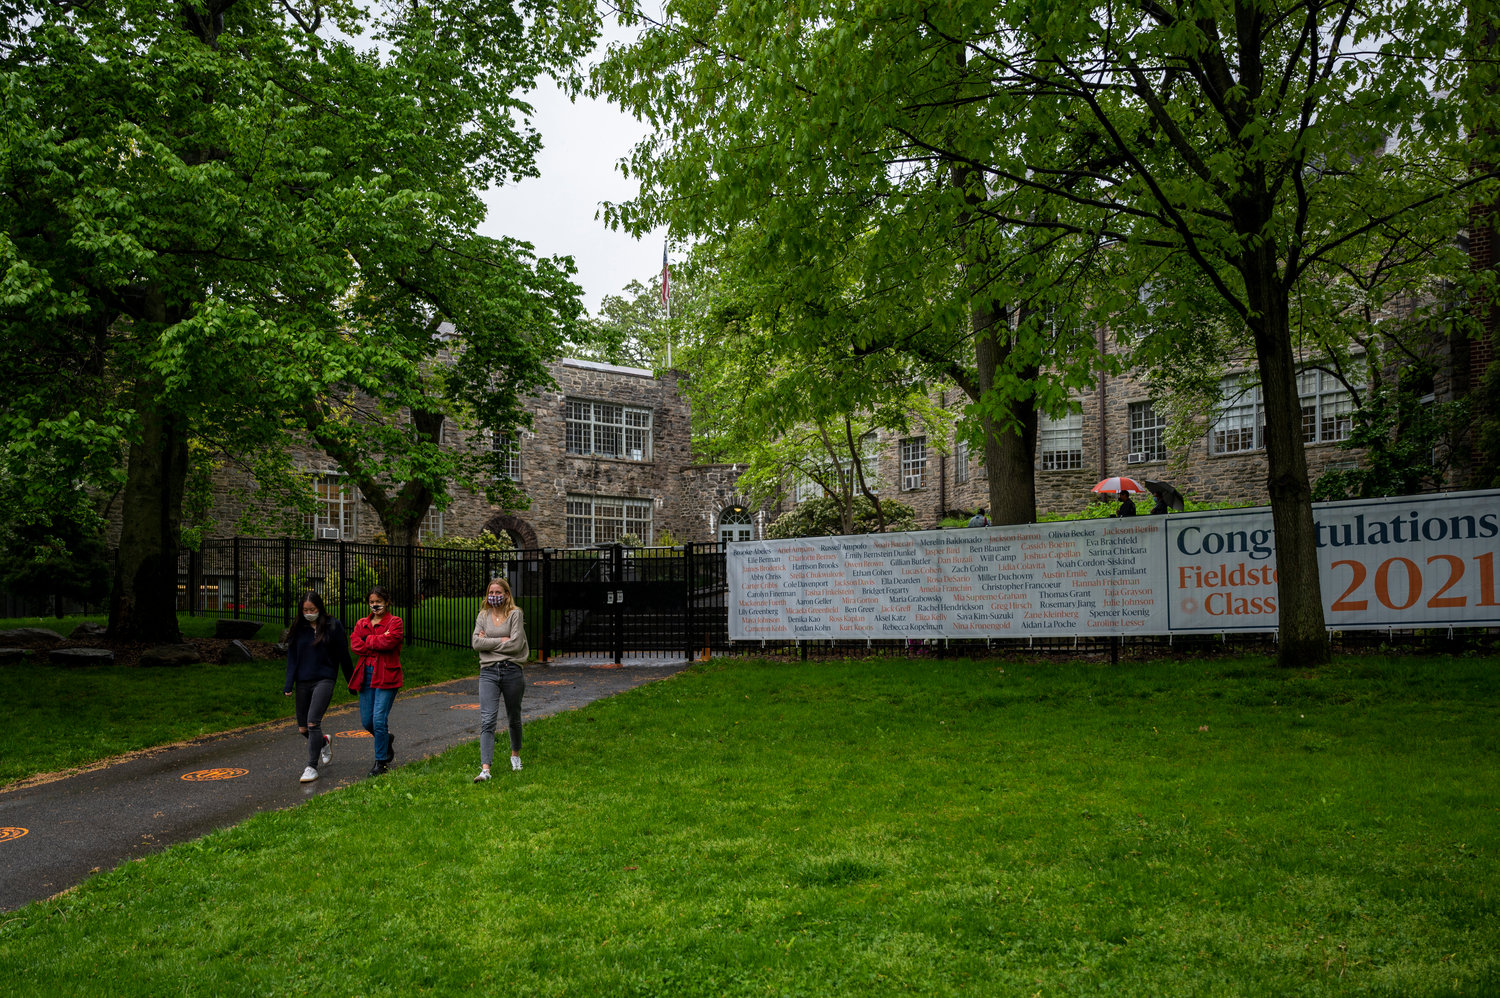 Ethical Culture Fieldston School has been sued by a family claiming the school failed to act on reports of students alleging racial discrimination at the school. Administrators say they are committed to diversity on campus.